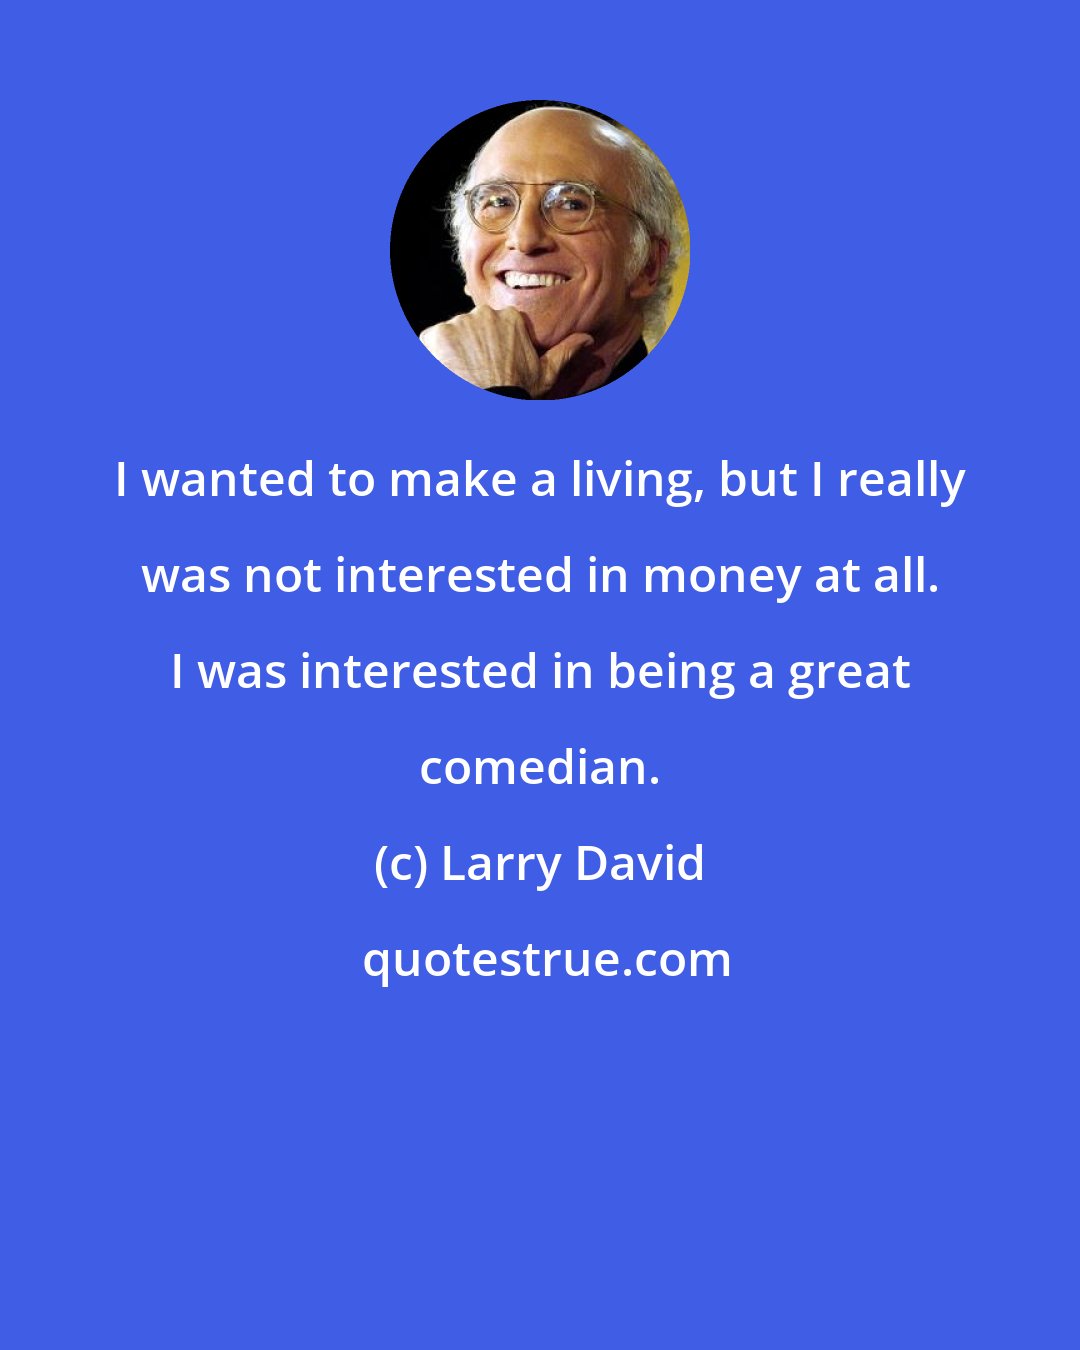 Larry David: I wanted to make a living, but I really was not interested in money at all. I was interested in being a great comedian.